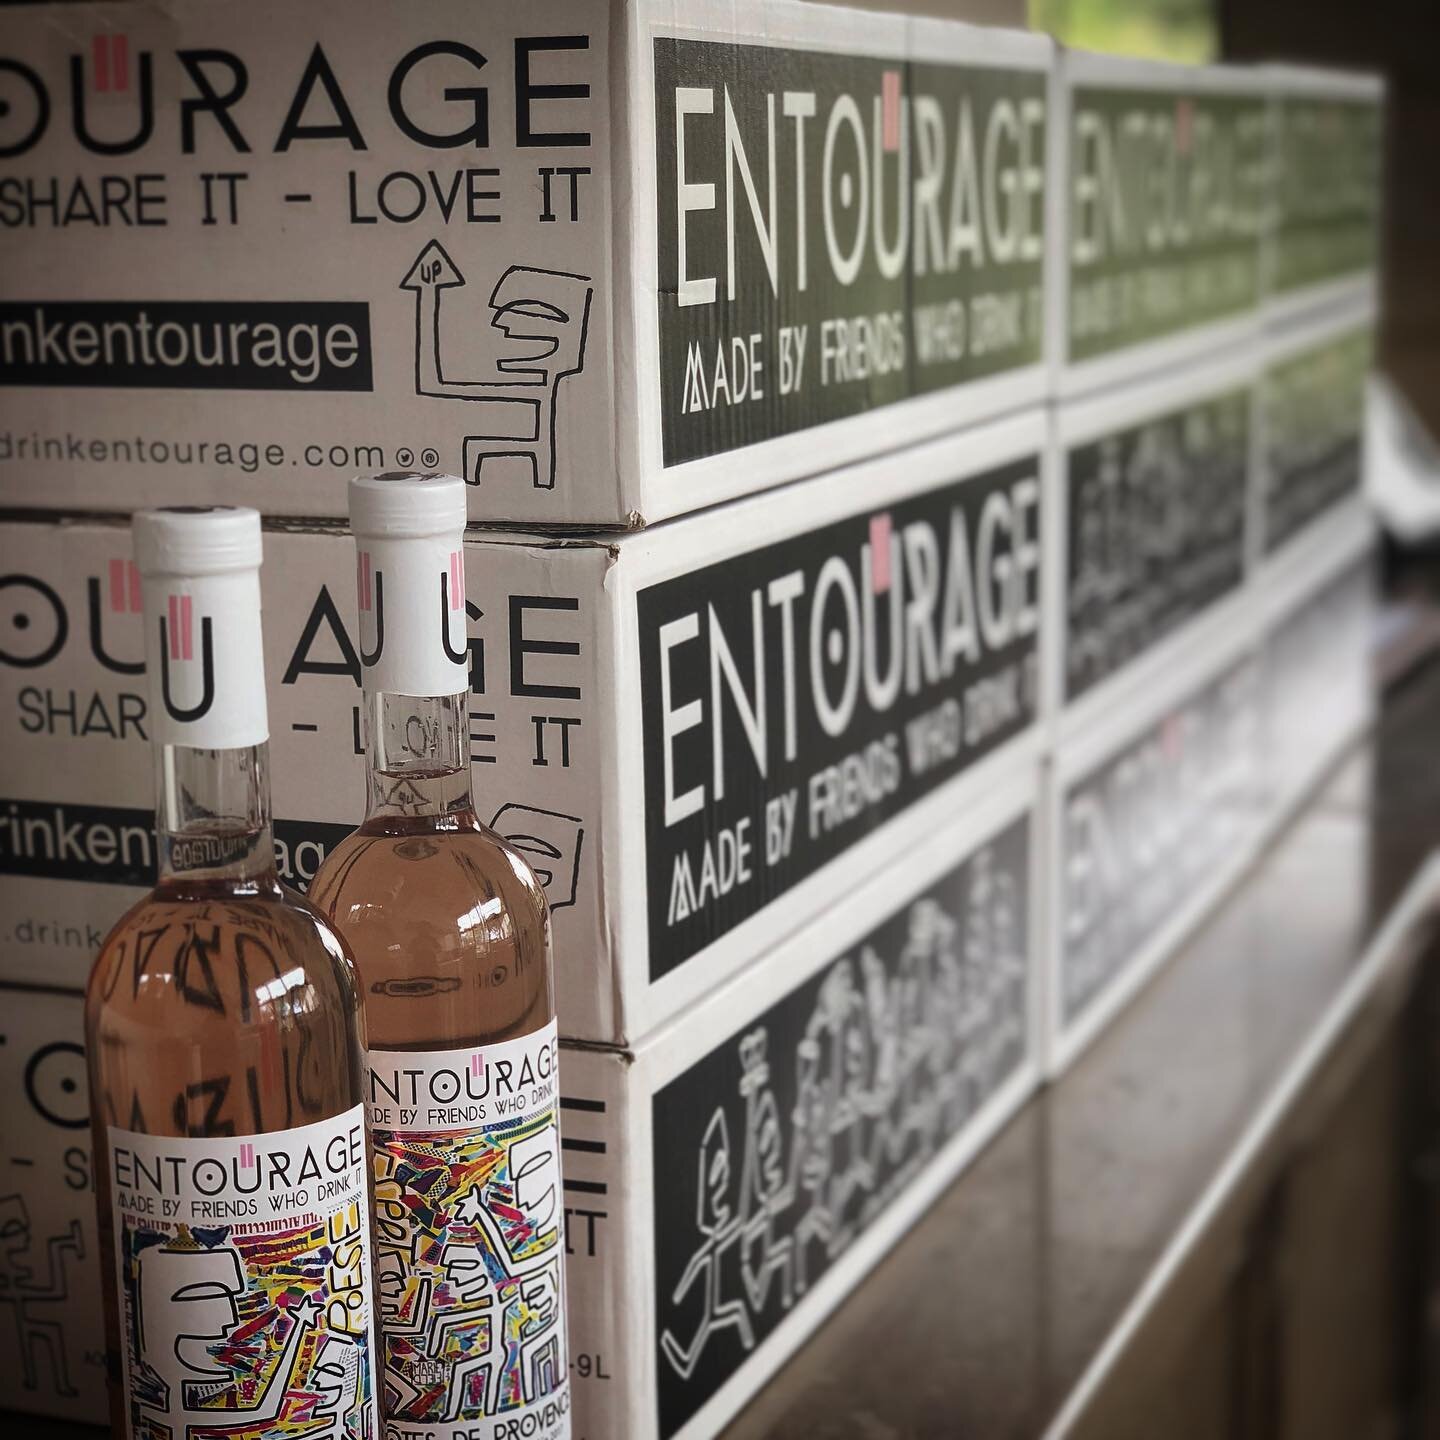 1st Vintage Memories never gets old... Launching in NY, NJ, and FL...
#drinkentourage #rose #friends